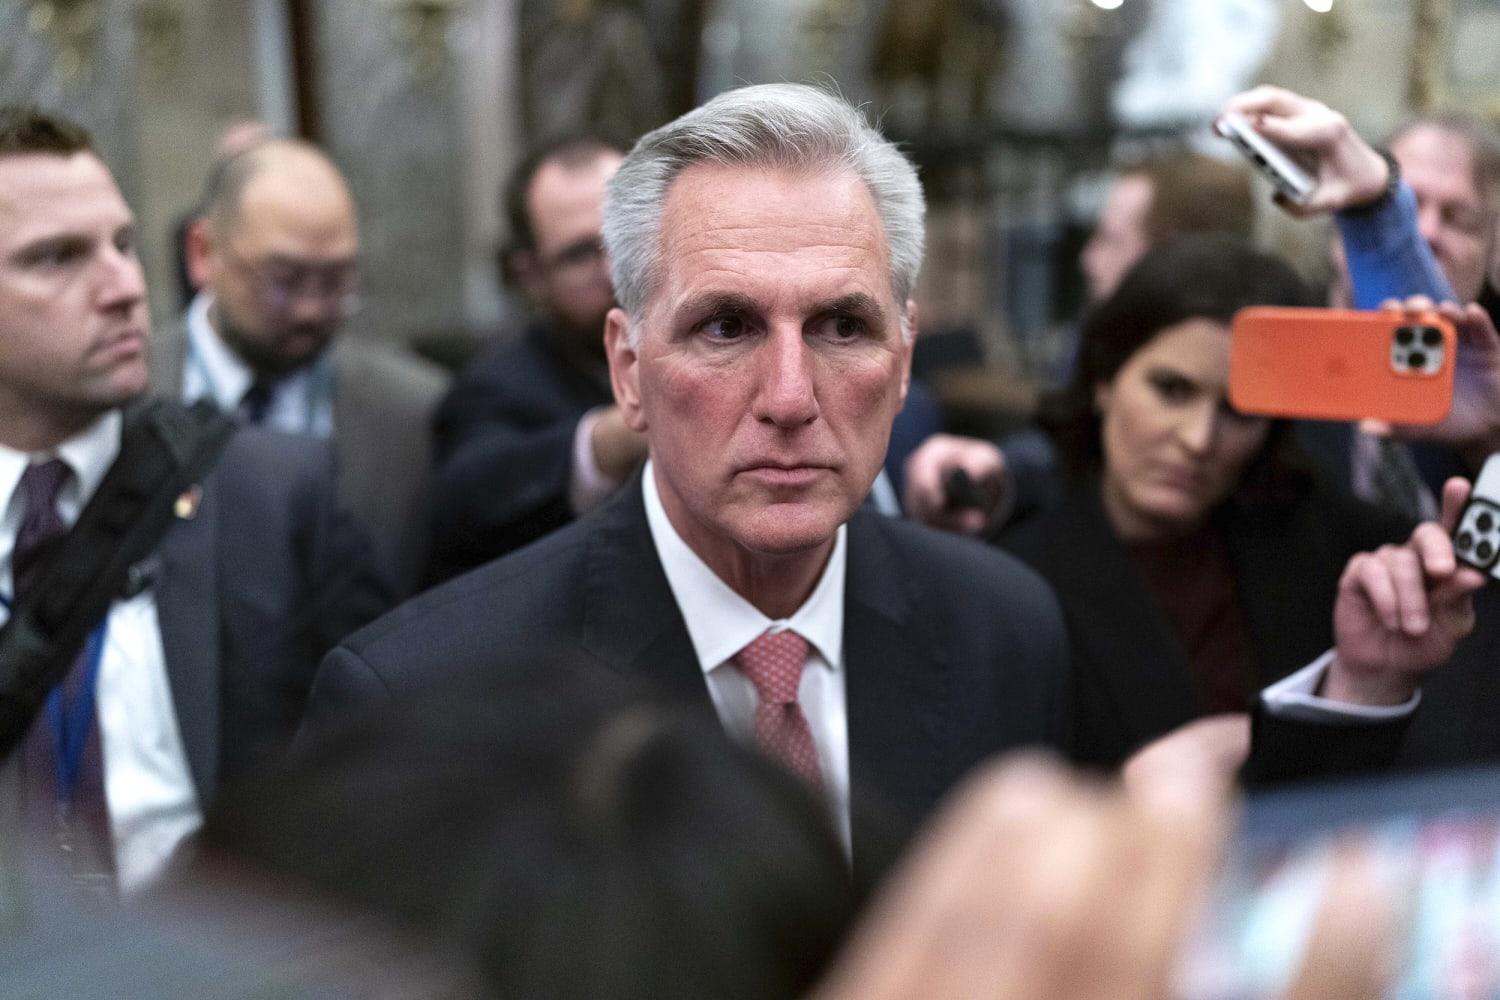 Kevin McCarthy elected speaker of the House following chaos on the floor